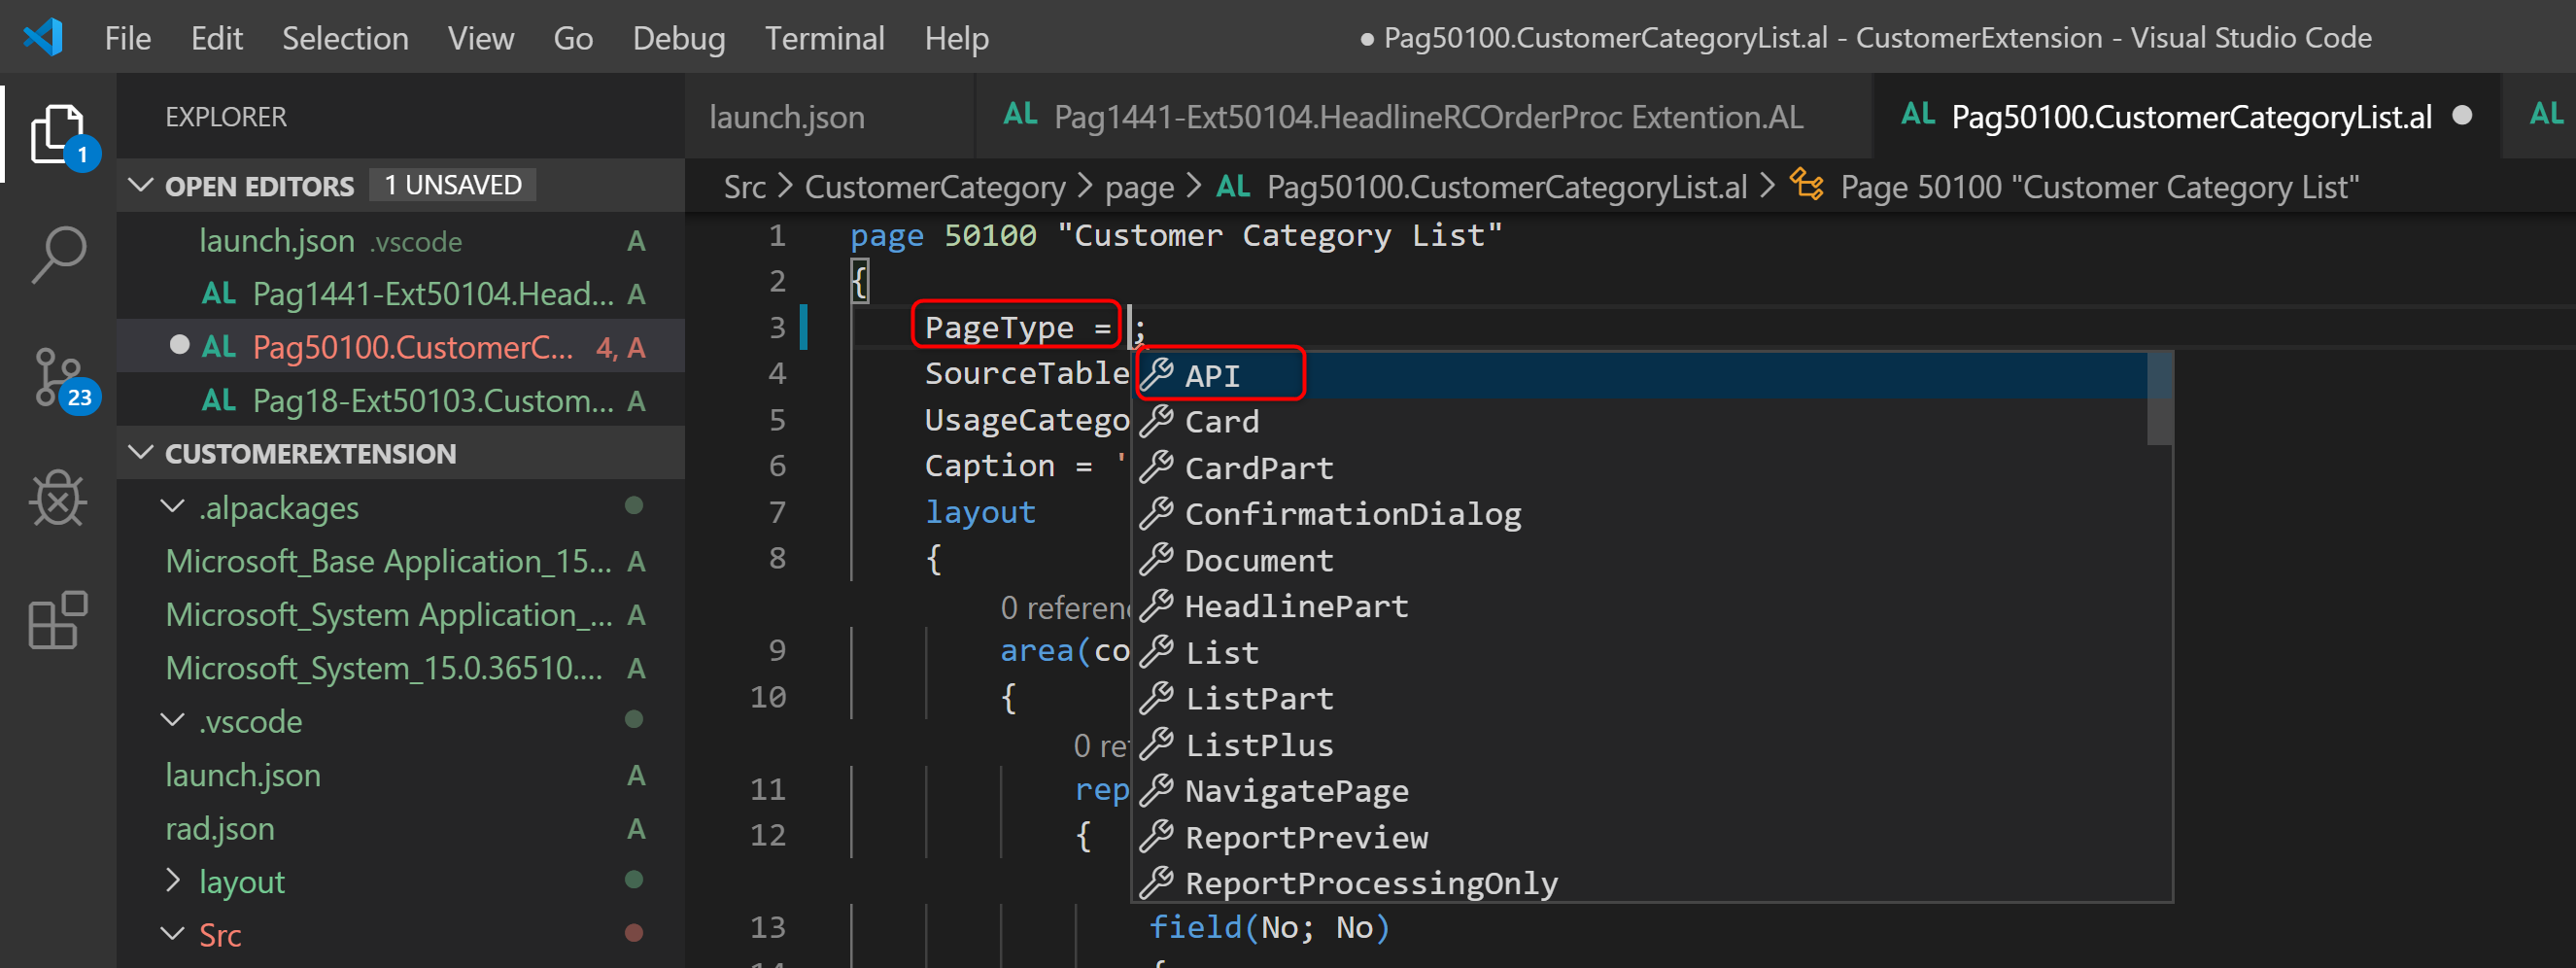 Dynamics 365 Business Central (Navision) - Page Type: API